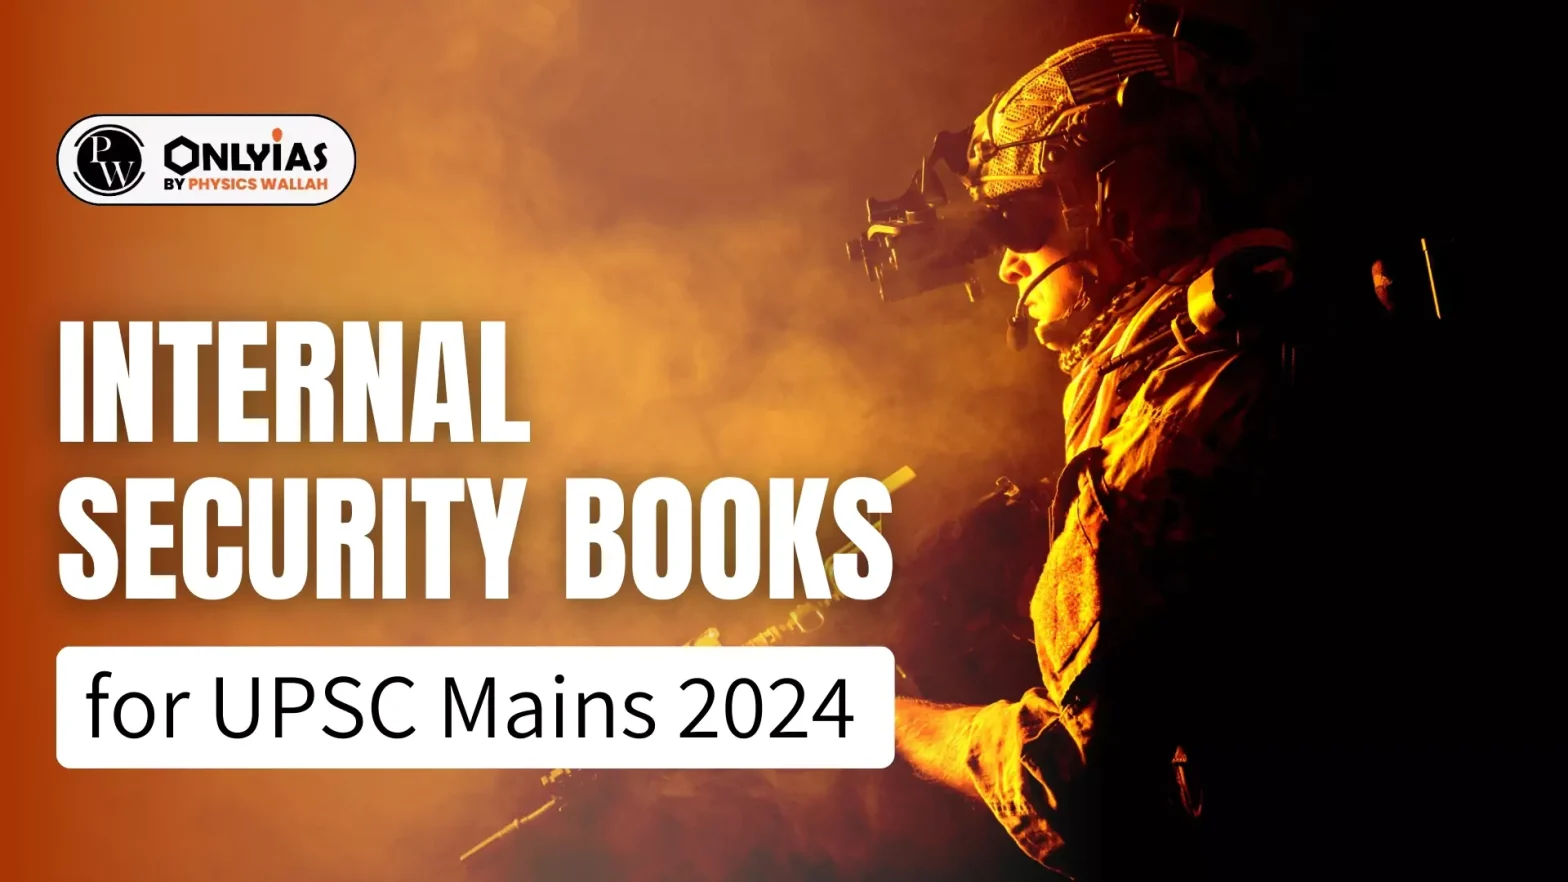 Internal Security Books for UPSC Mains 2024